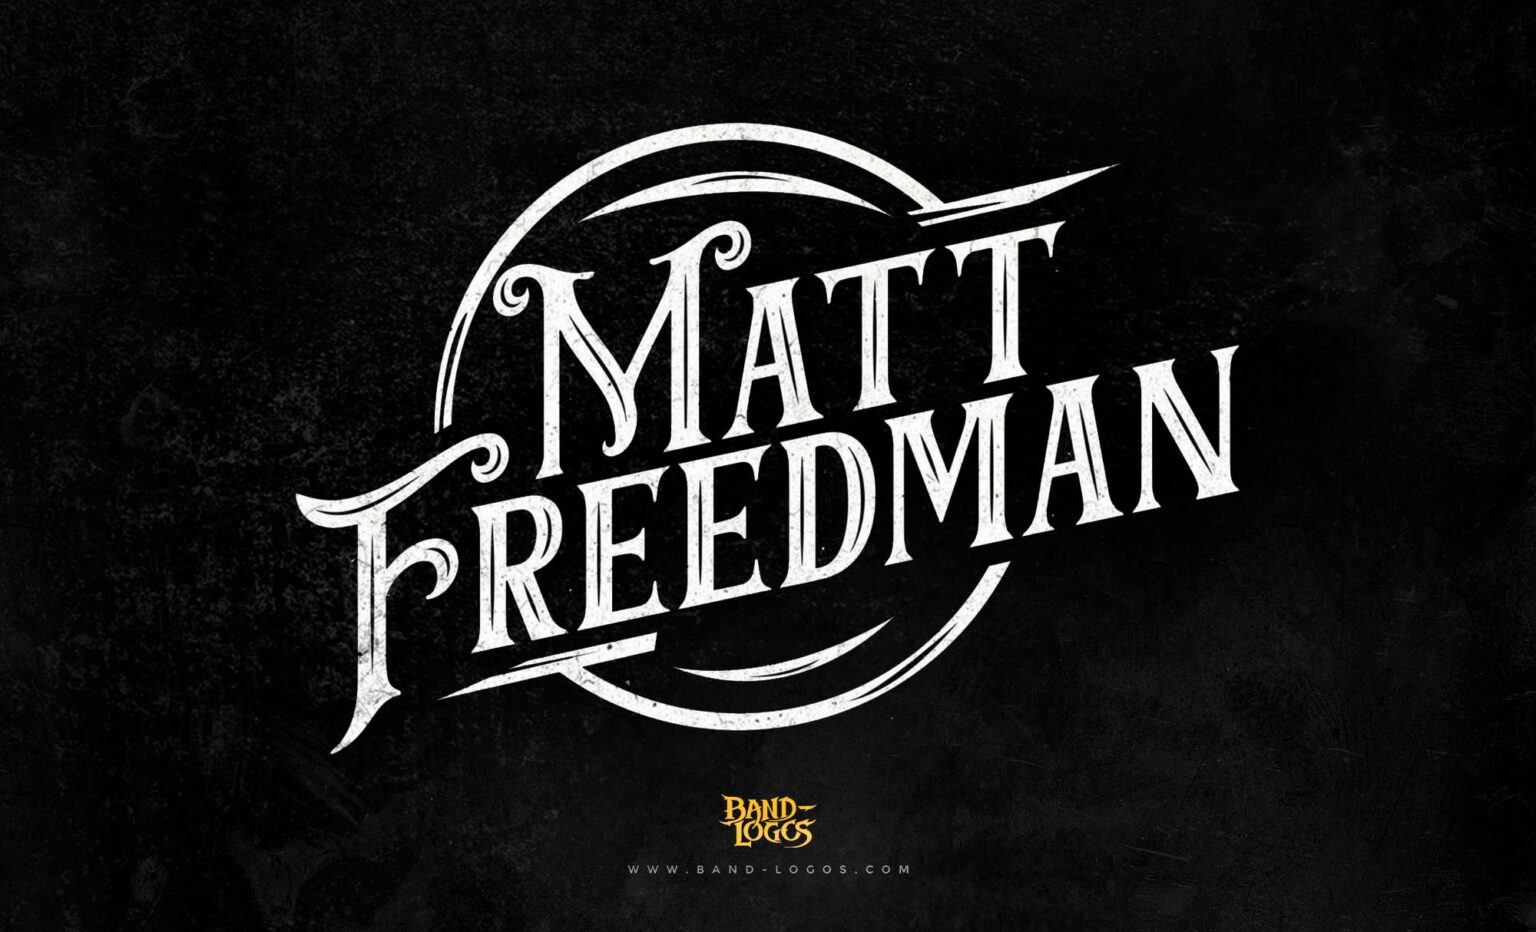 Country Rock Band Logos - Marty Freedman